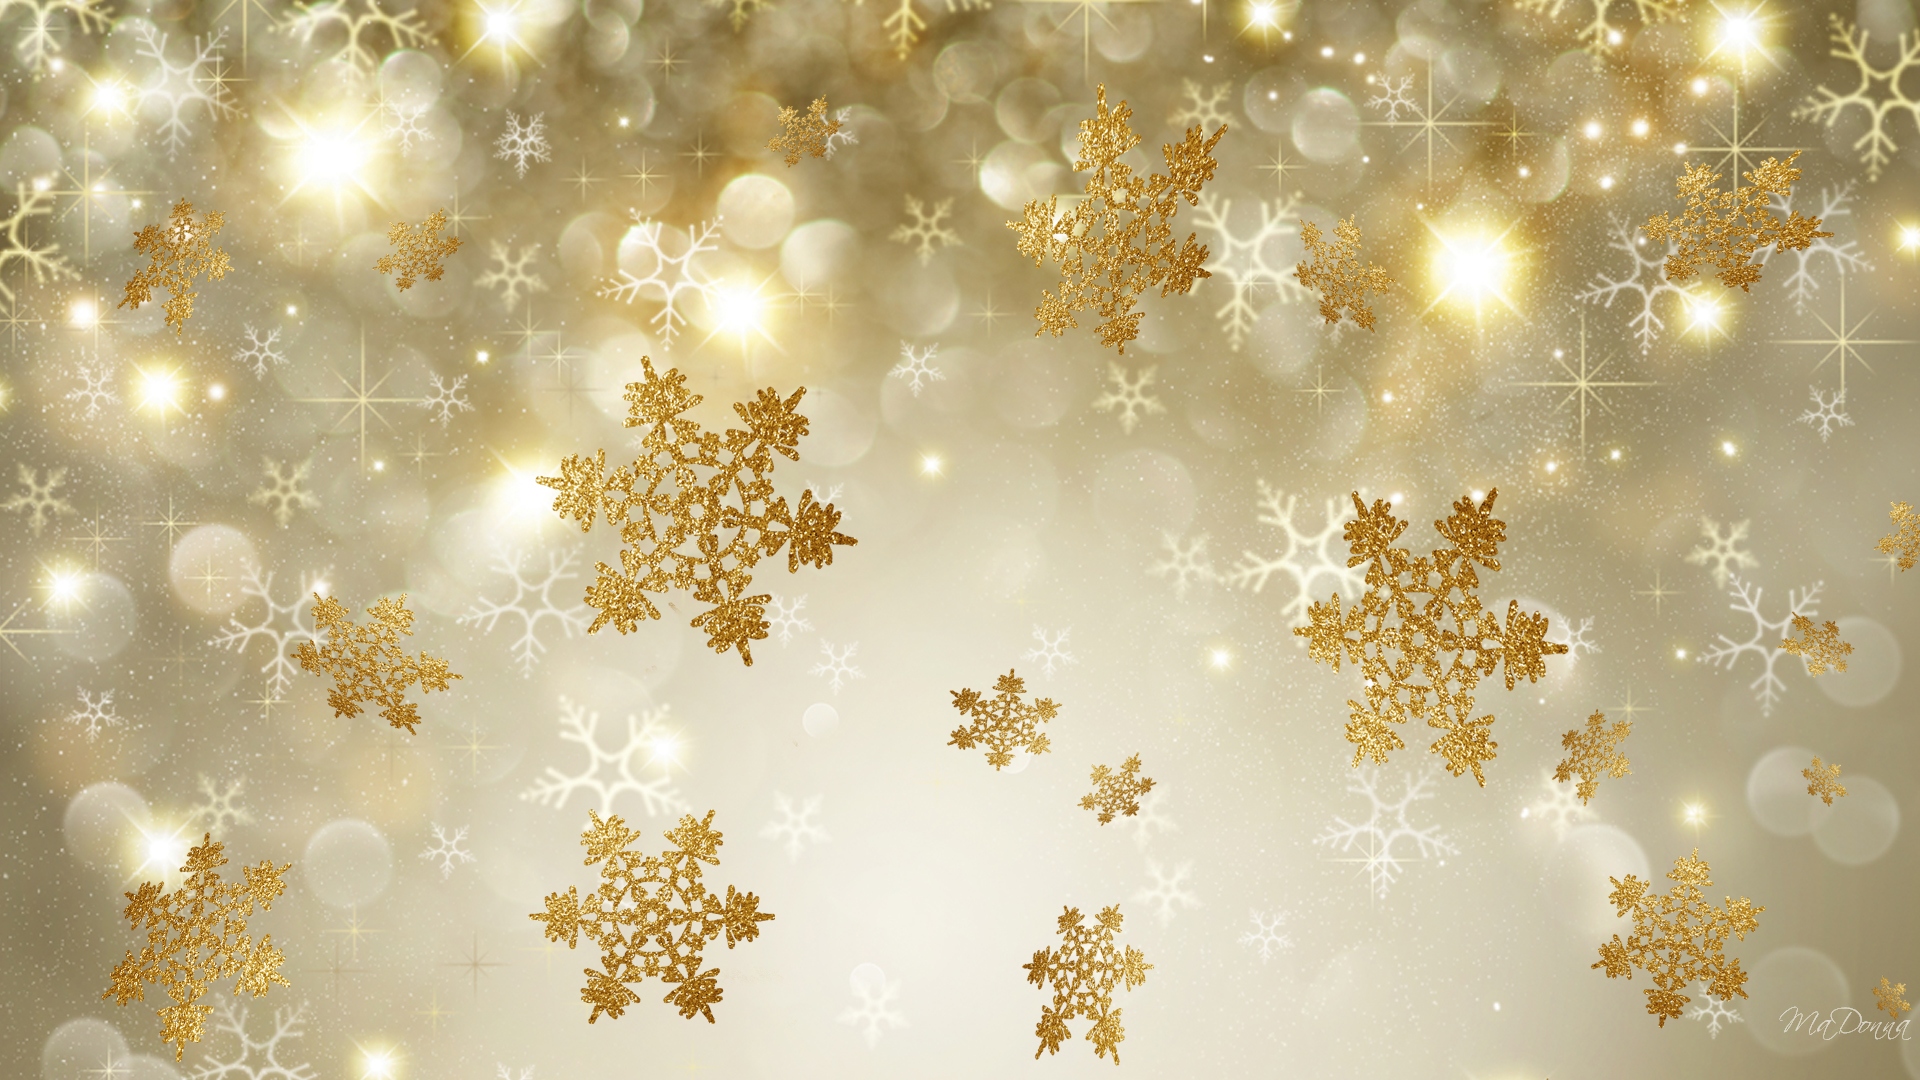 Golden Snowflakes HD Wallpaper Background Image